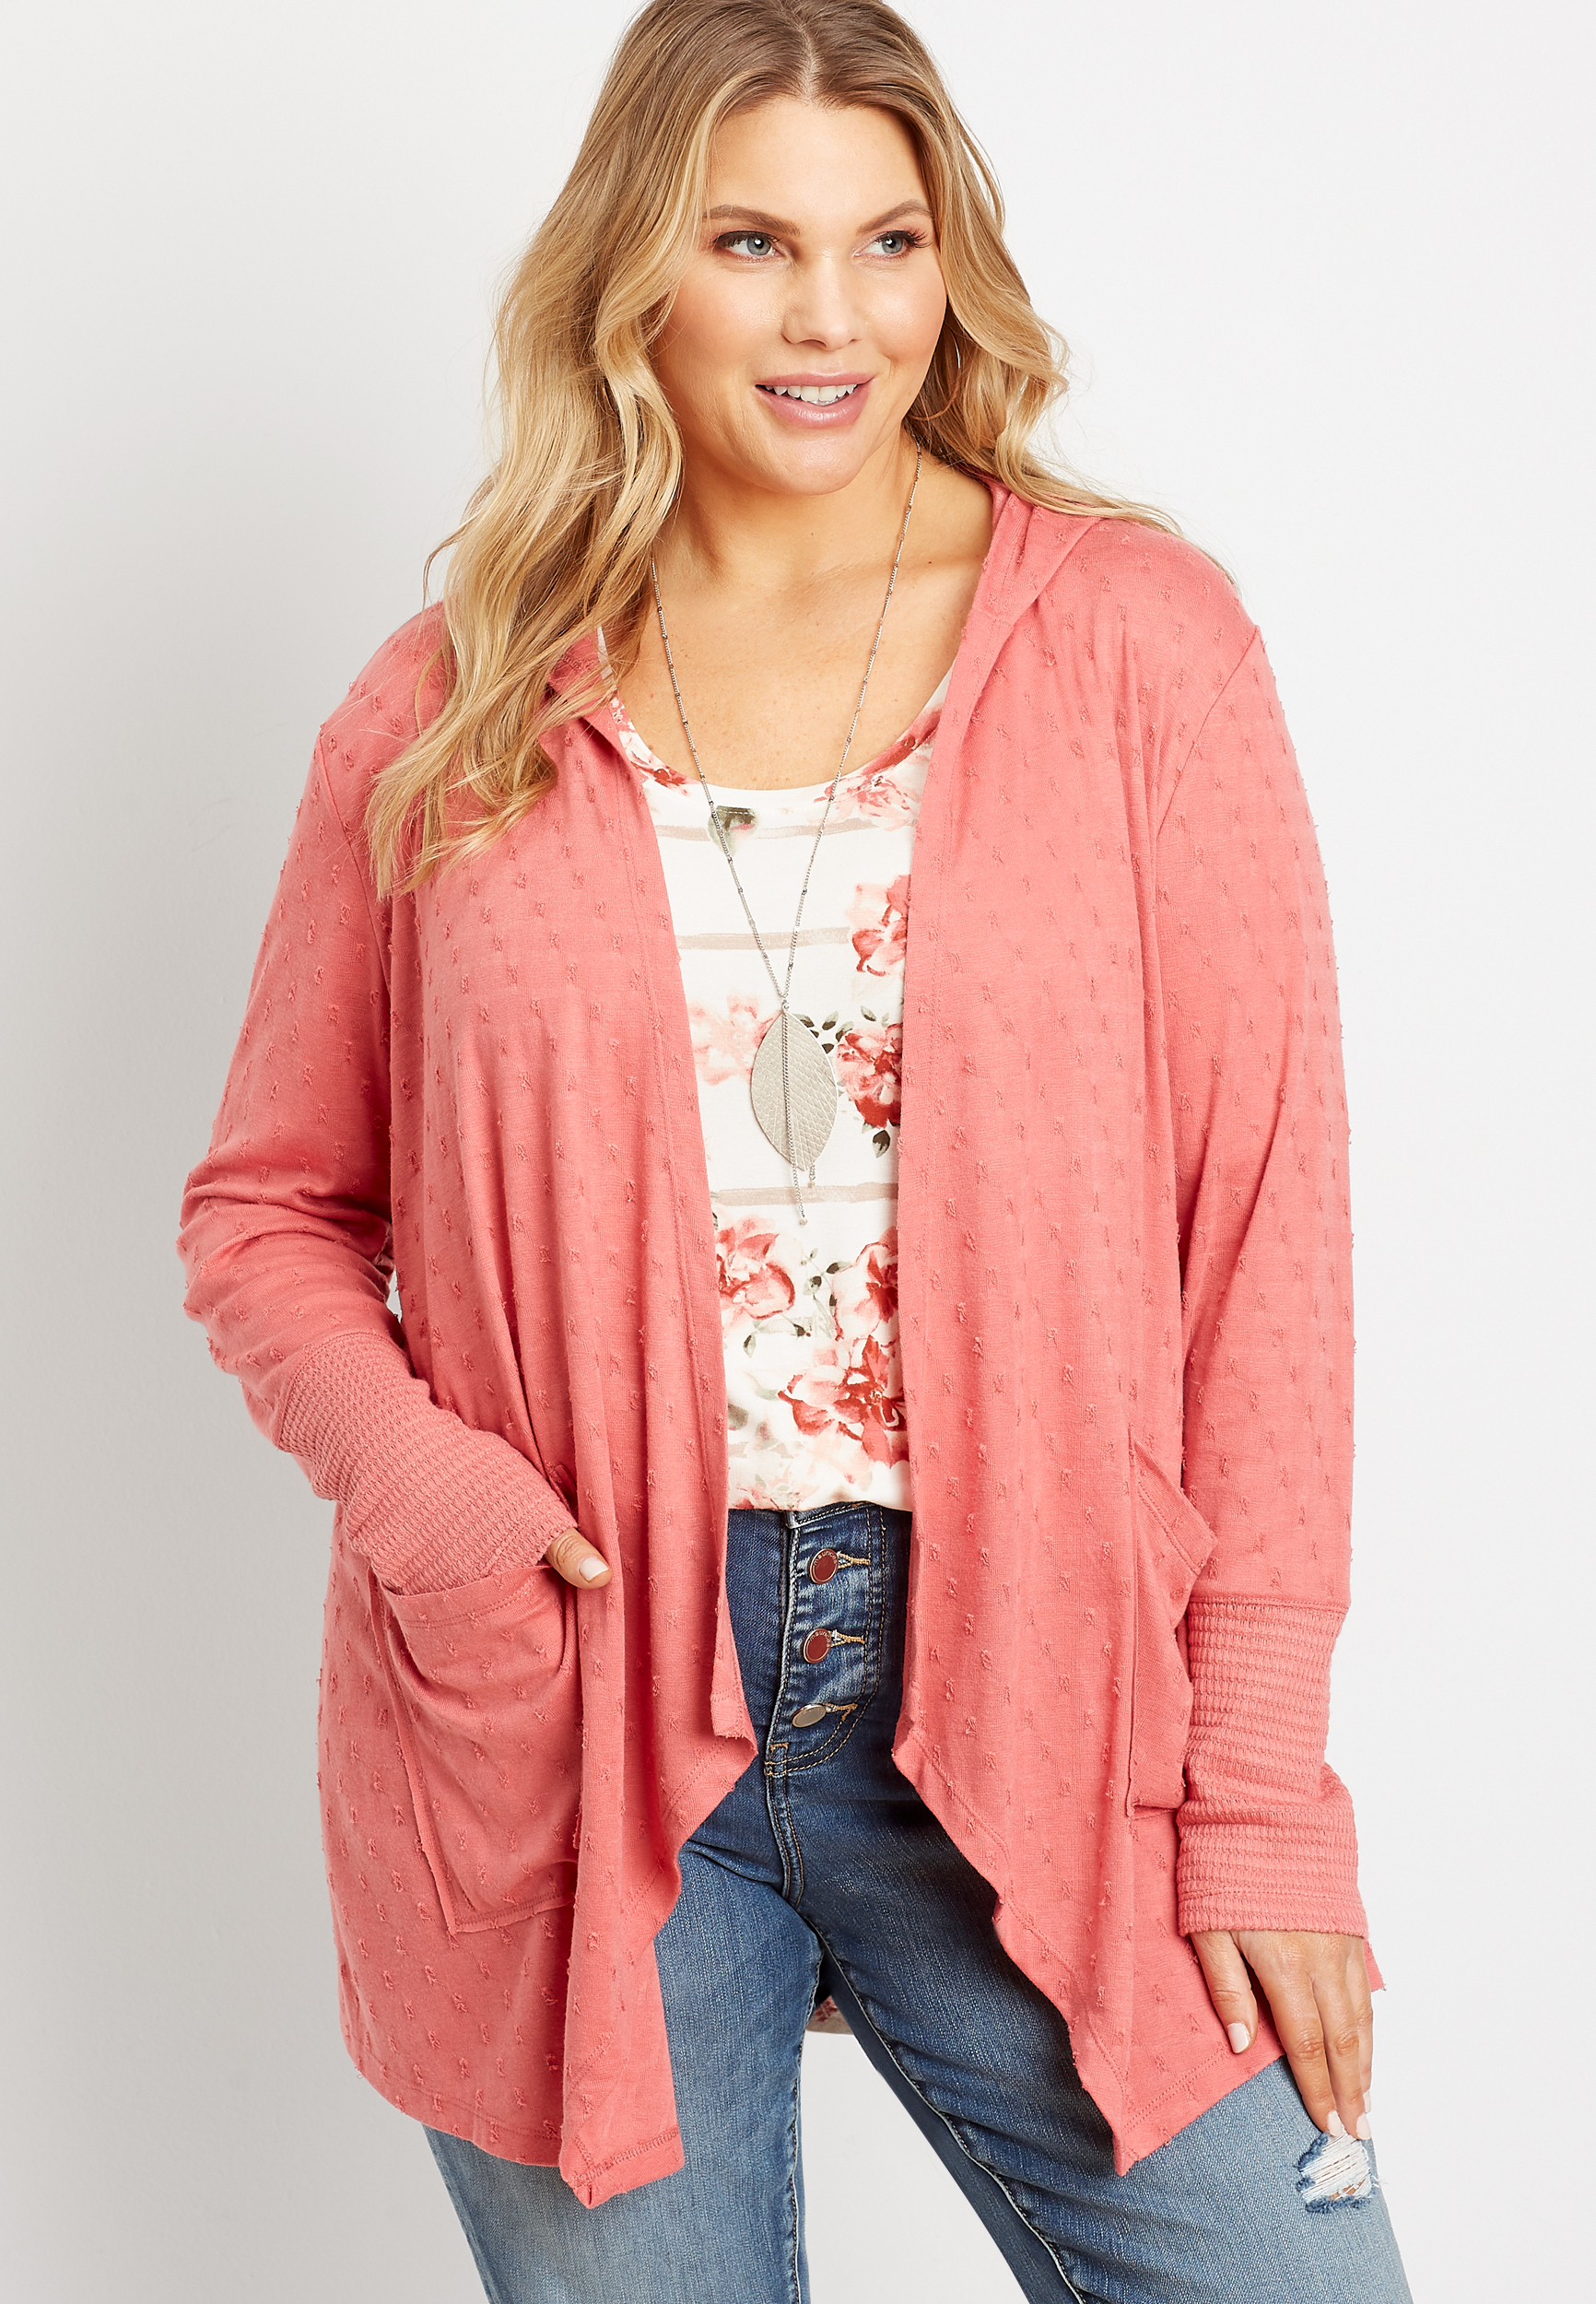 Plus Size Coral Cardigan | maurices